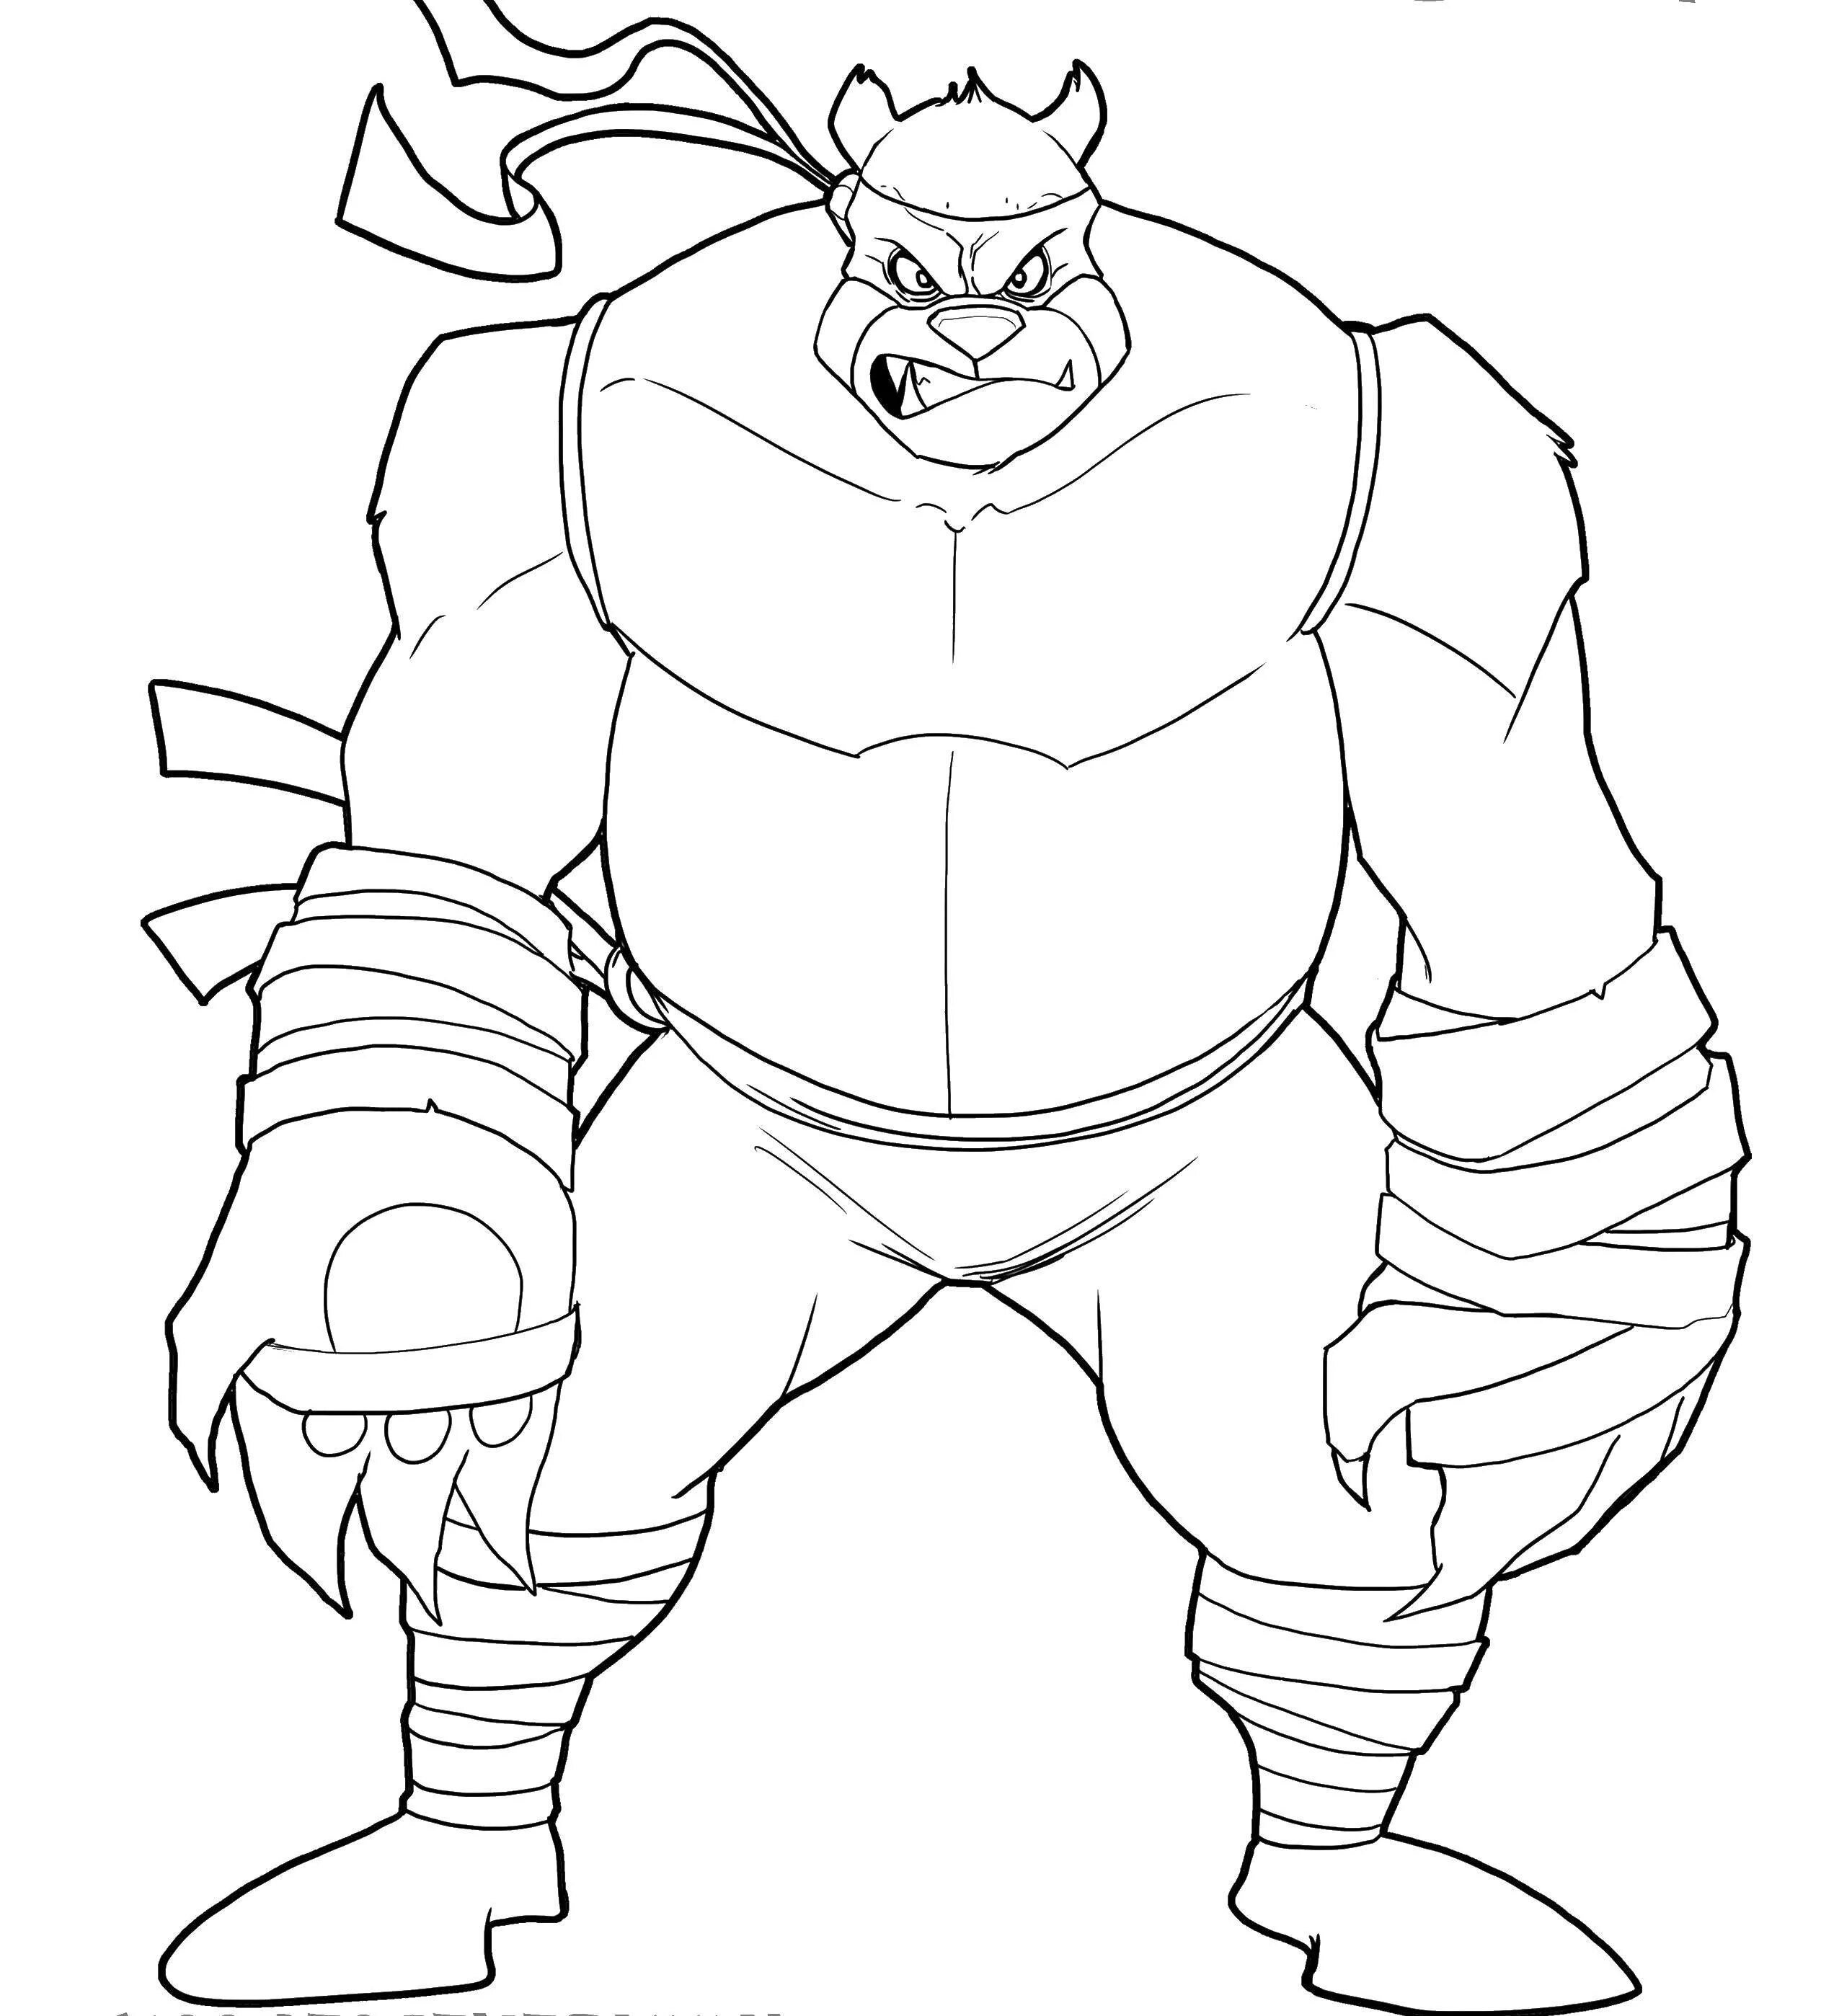 Animated gujutsu character coloring pages for kids